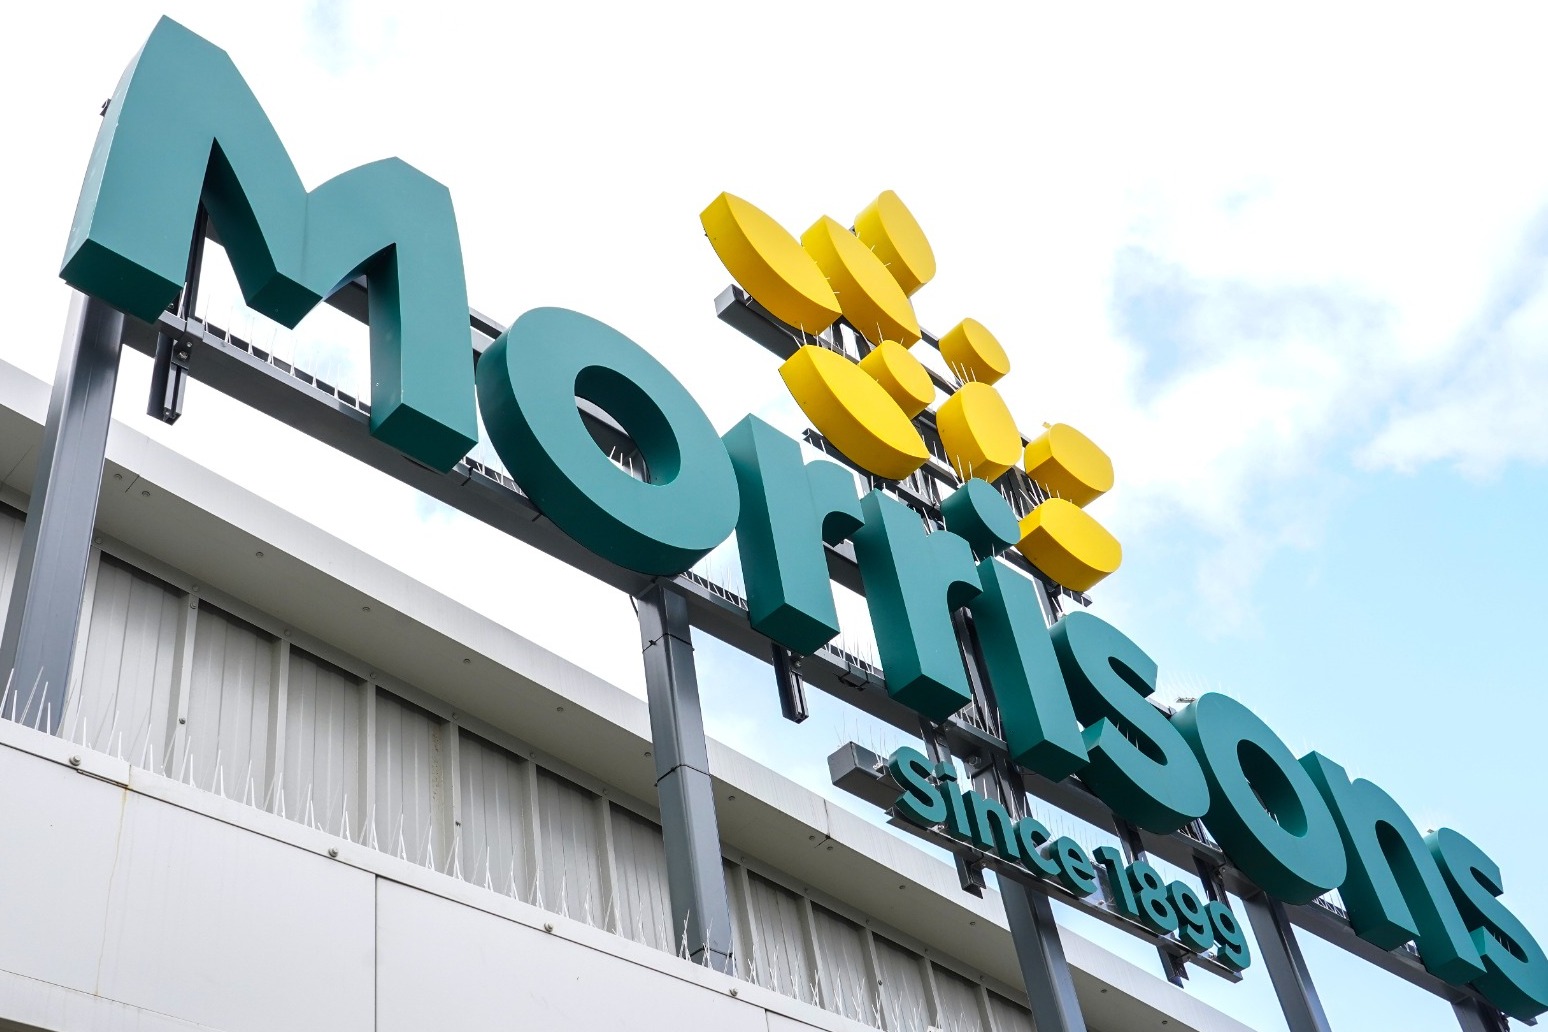 Morrisons stops disposable barbecue sales as dry spell sparks fire risk concerns 